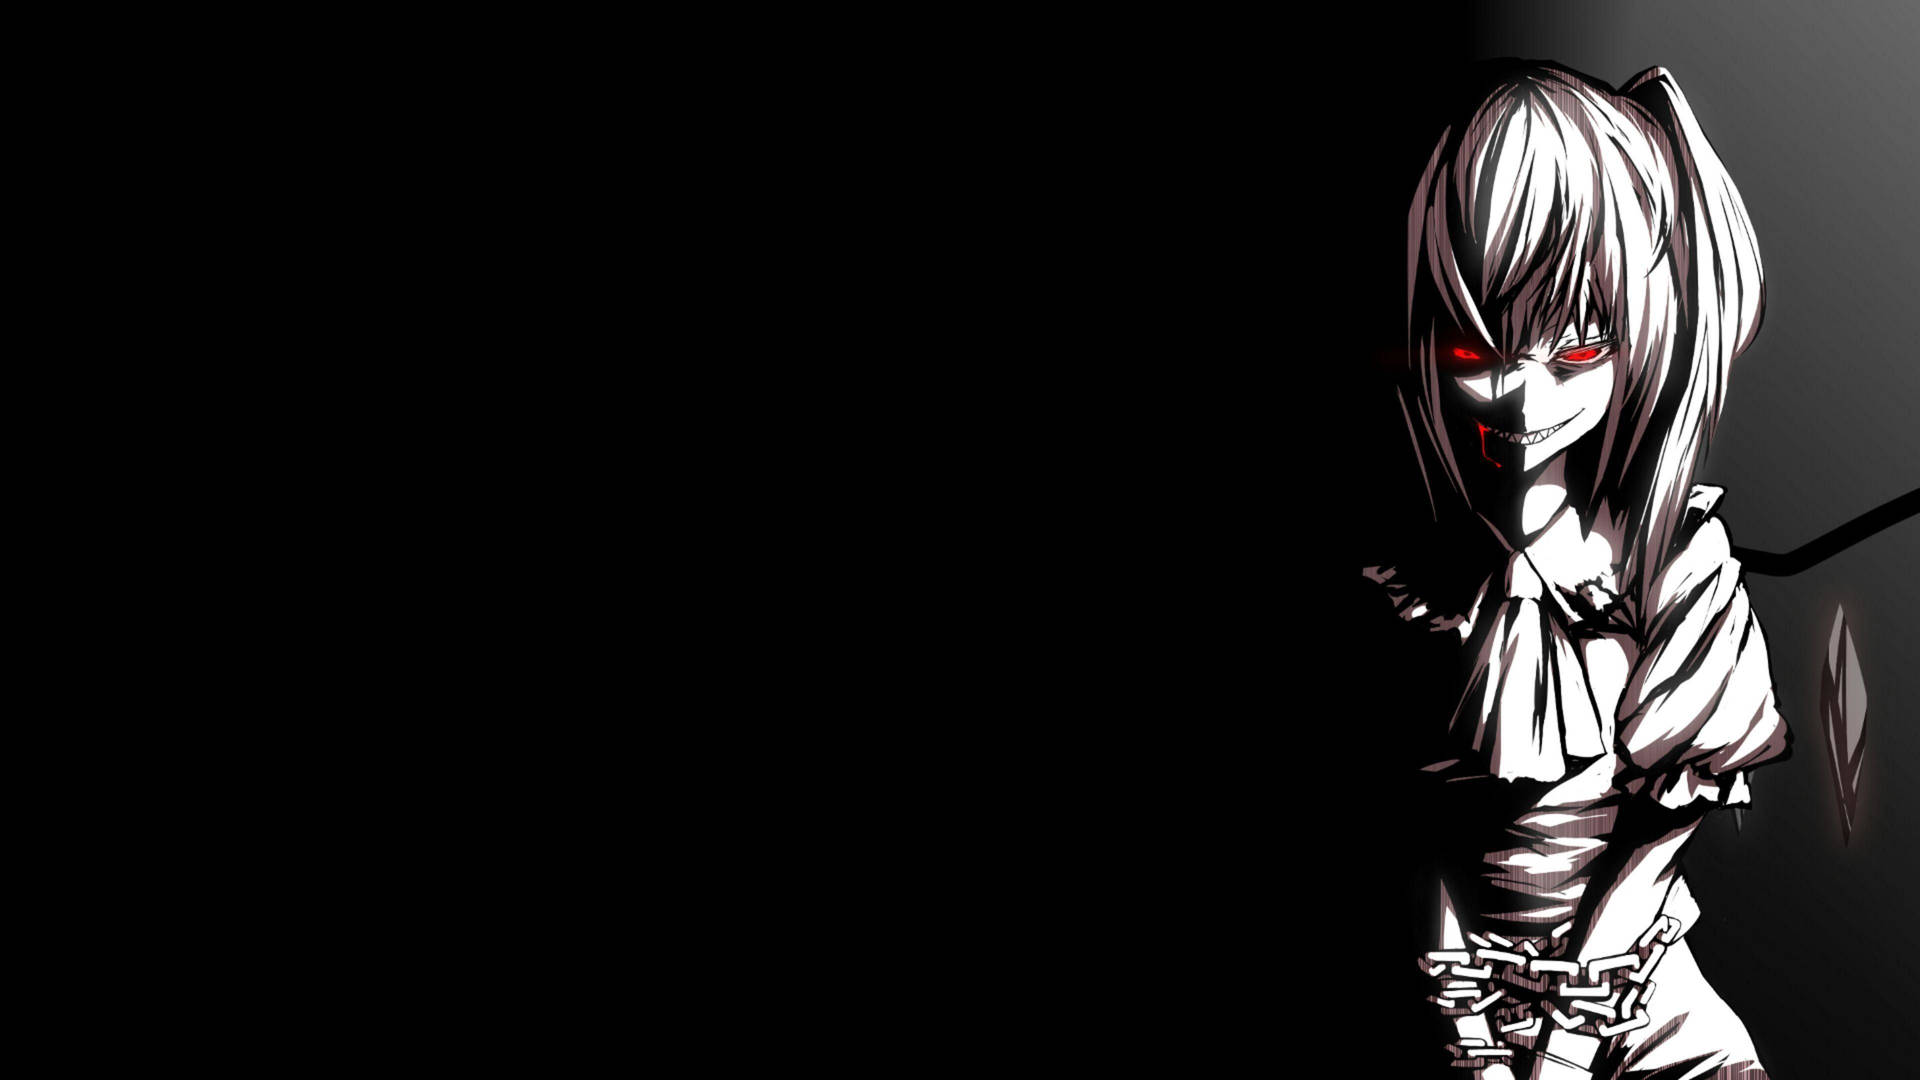 Chained Anime Demon Background